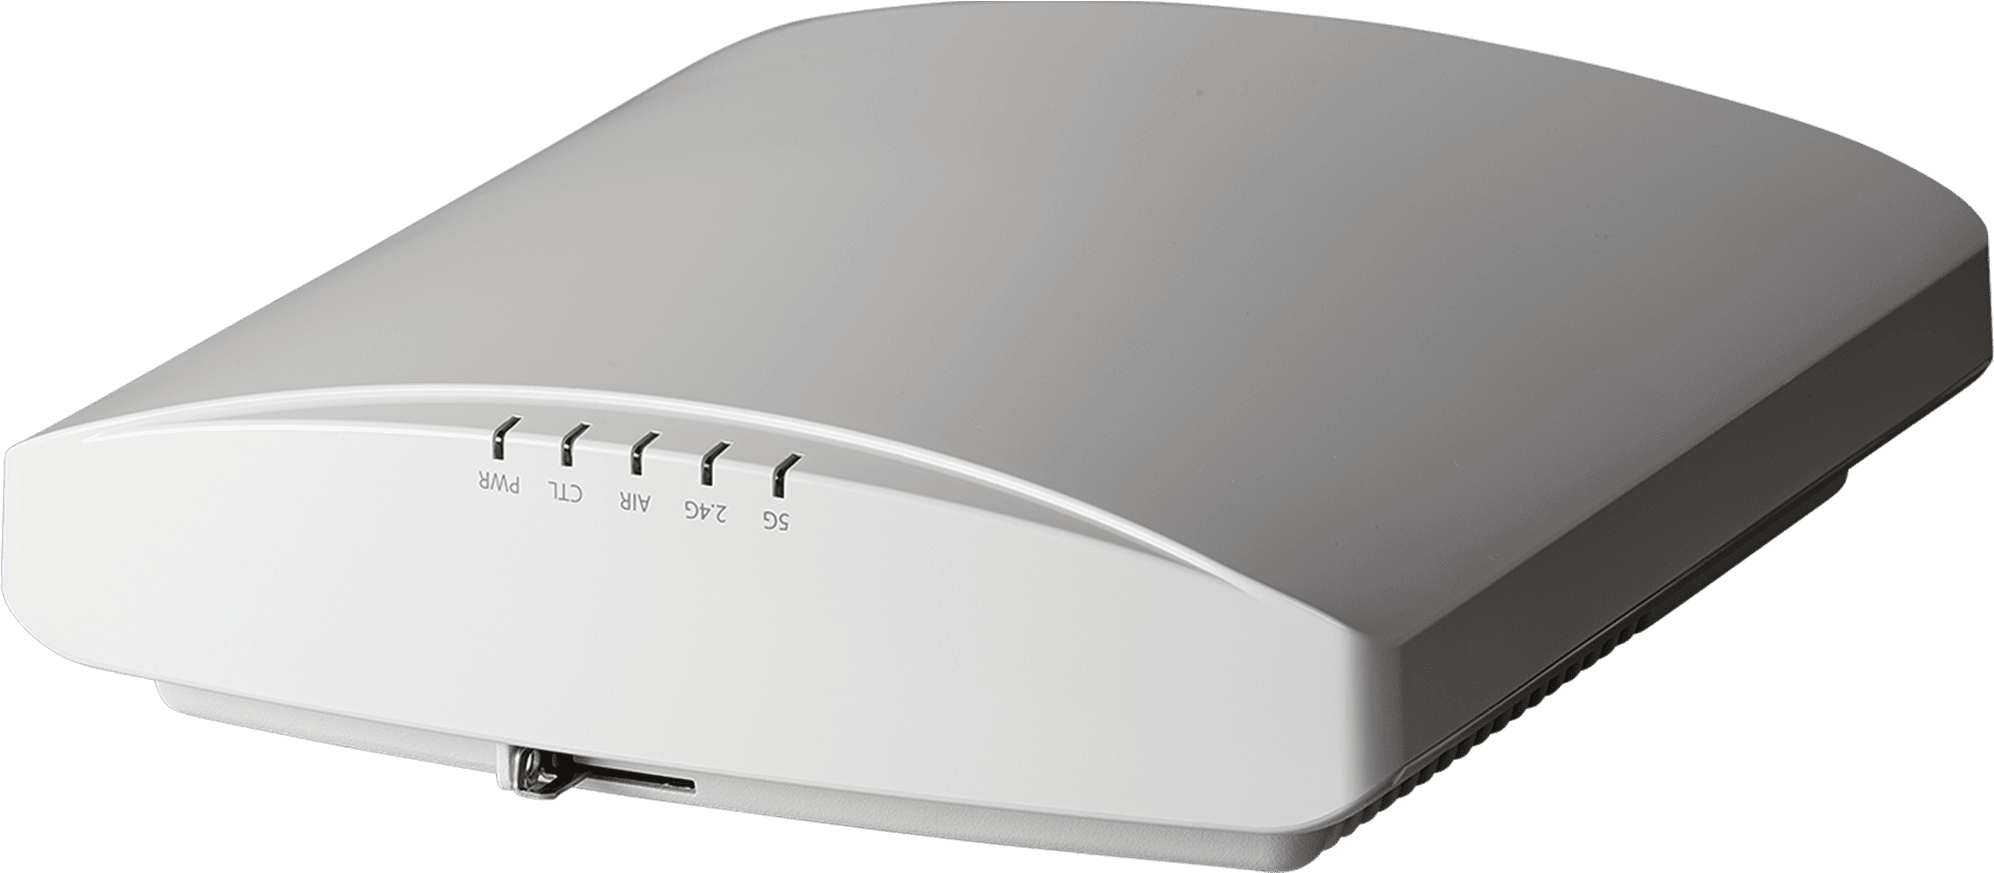 More A Thin Arrow Pointing To The Right - R730 Indoor Access Point (2000x874), Png Download